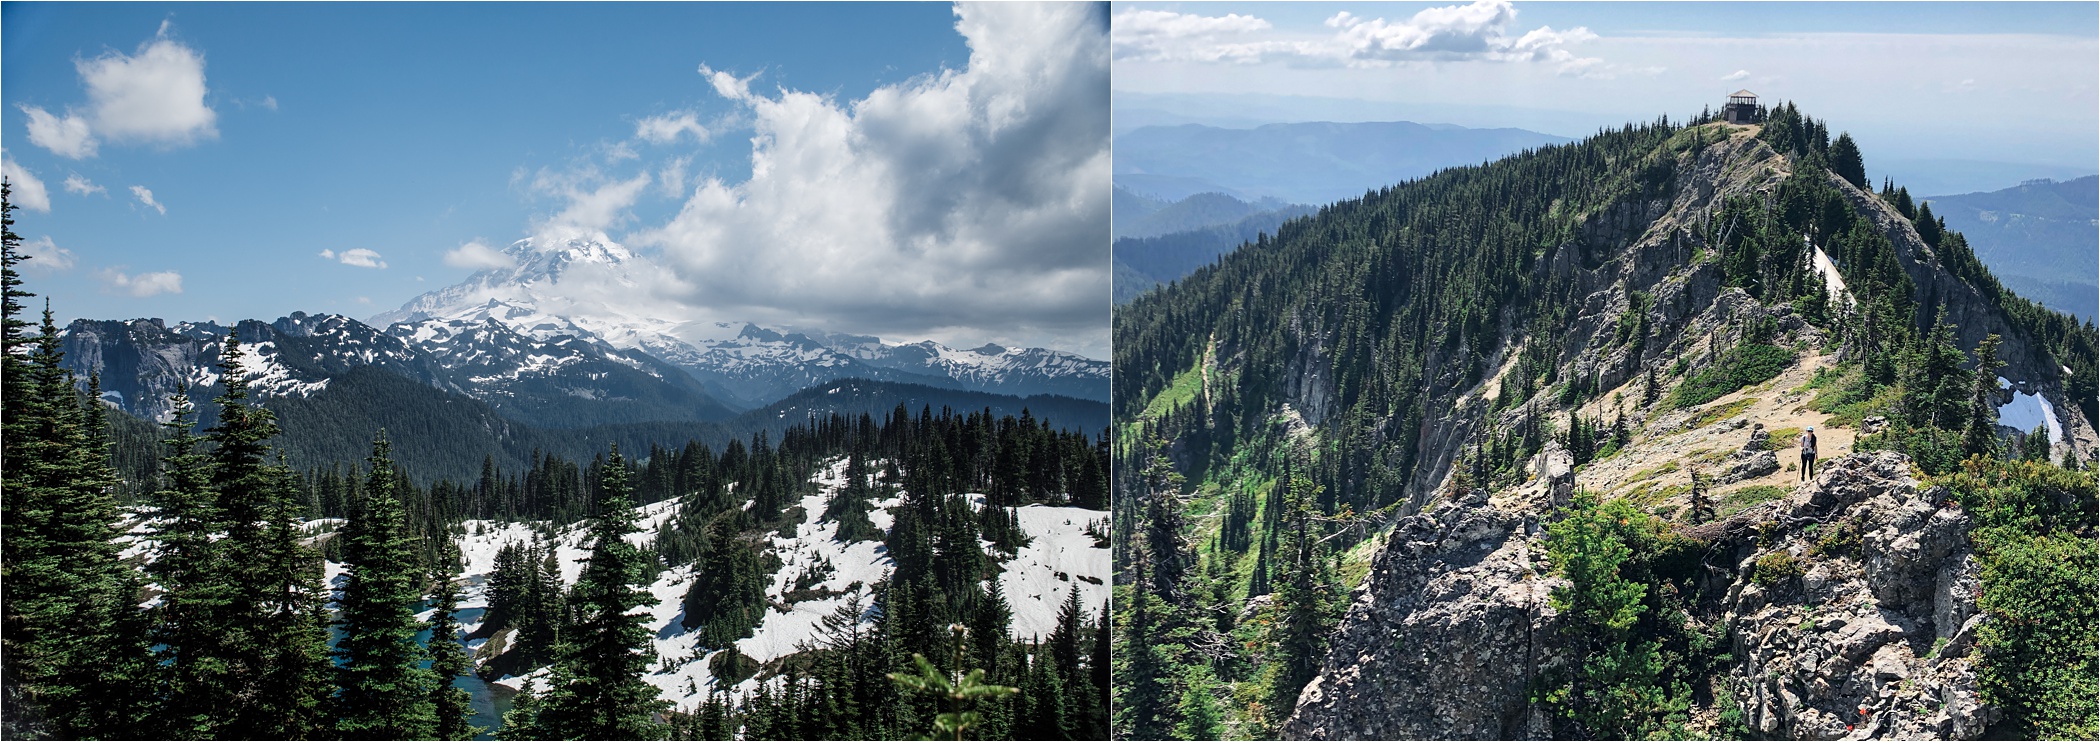 Tolmie Peak lookout location photos as one of the best places to elope at Mt. Rainier